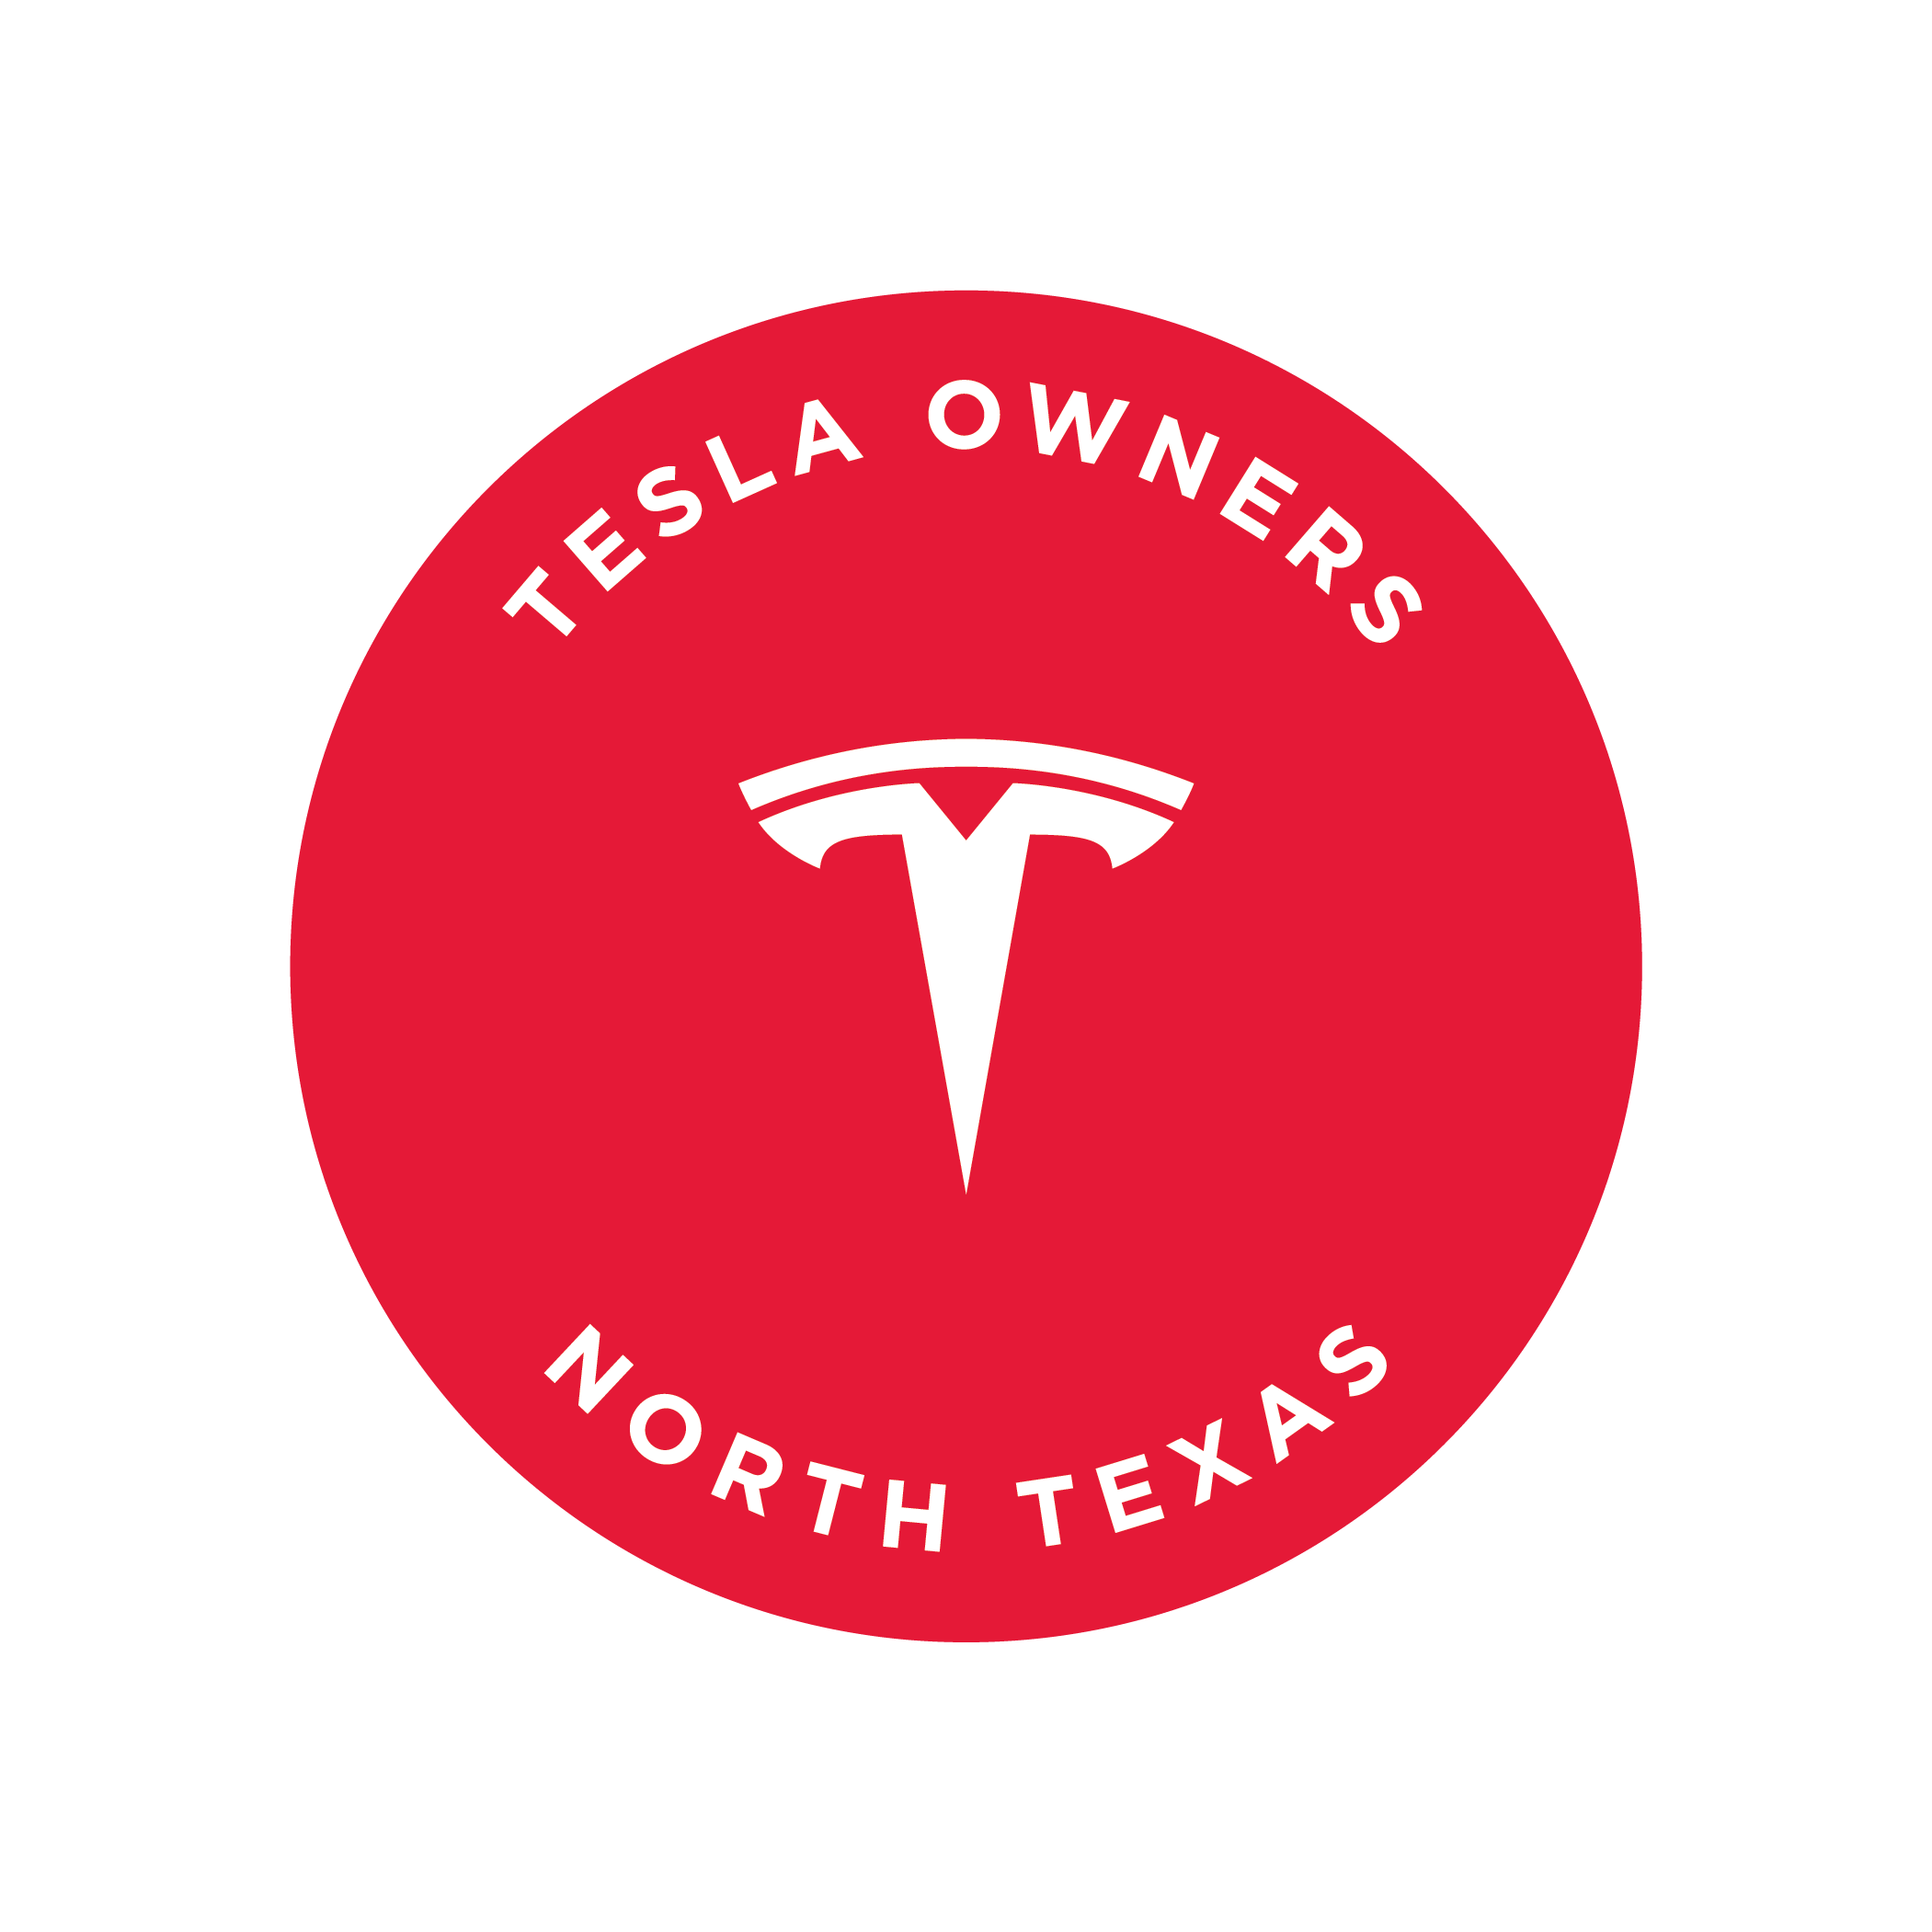 Tesla Owners Club of North Texas